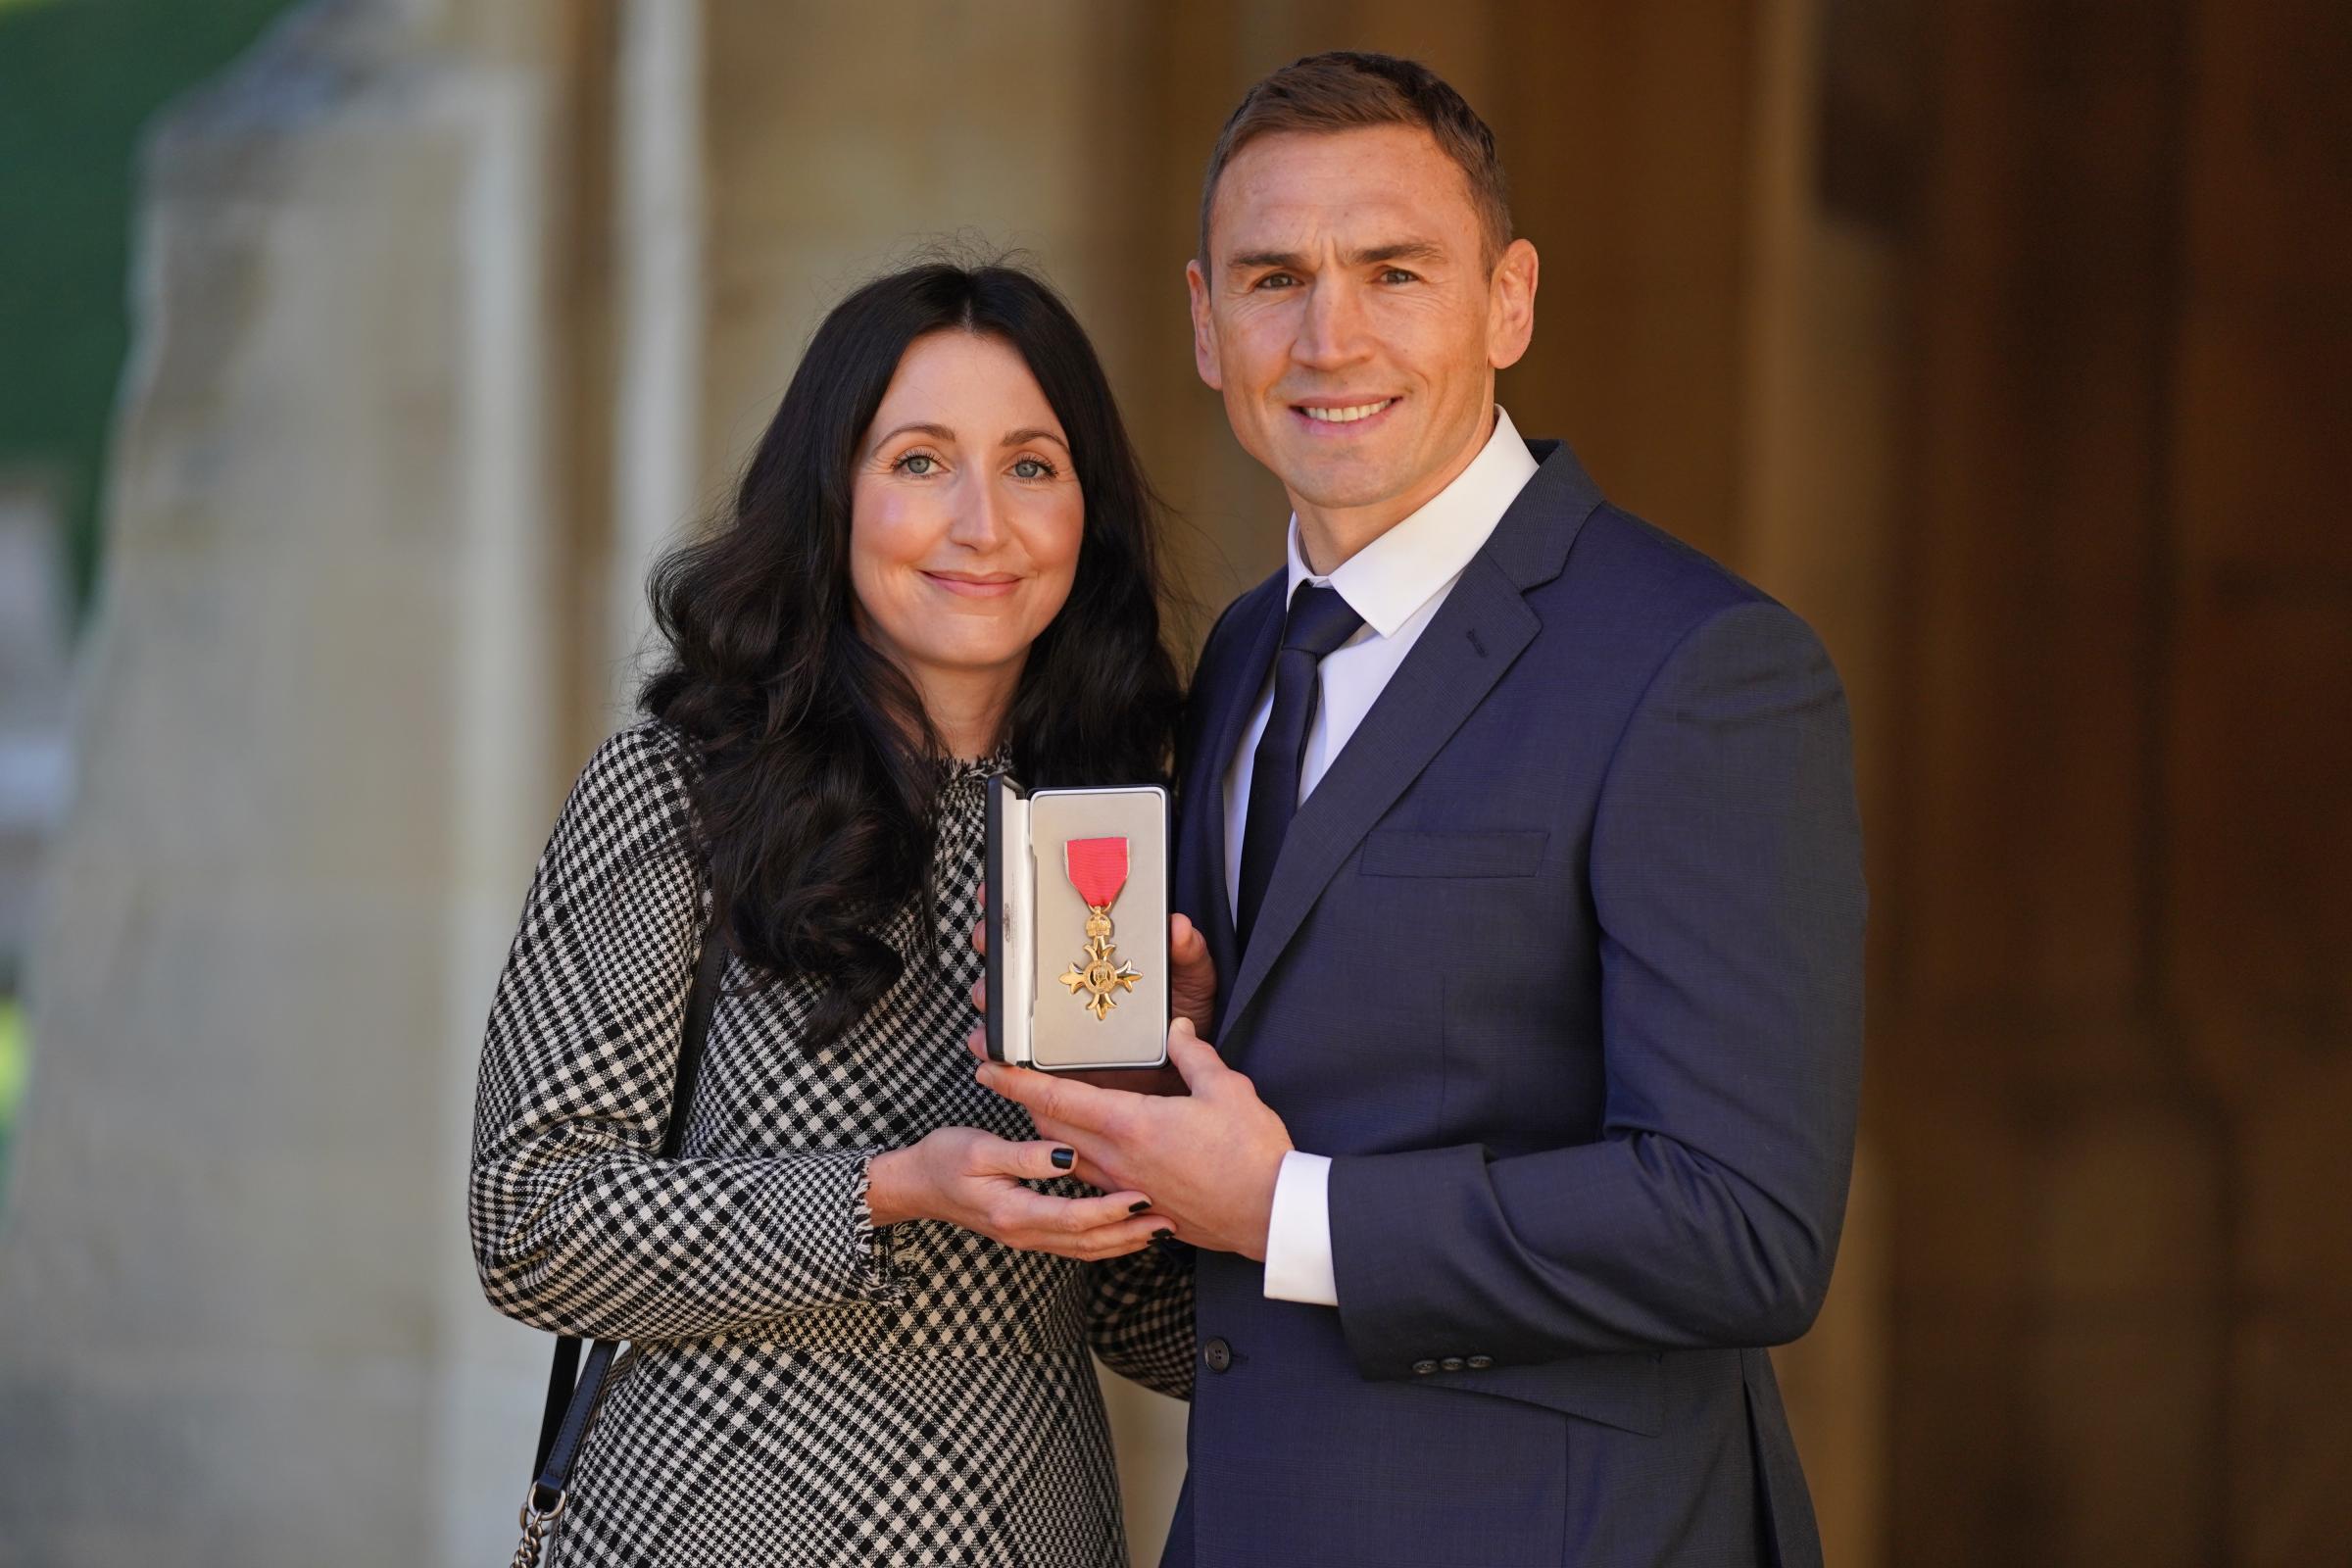 Kevin Sinfield with his wife Jayne (Picture: PA/Steve Parsons)